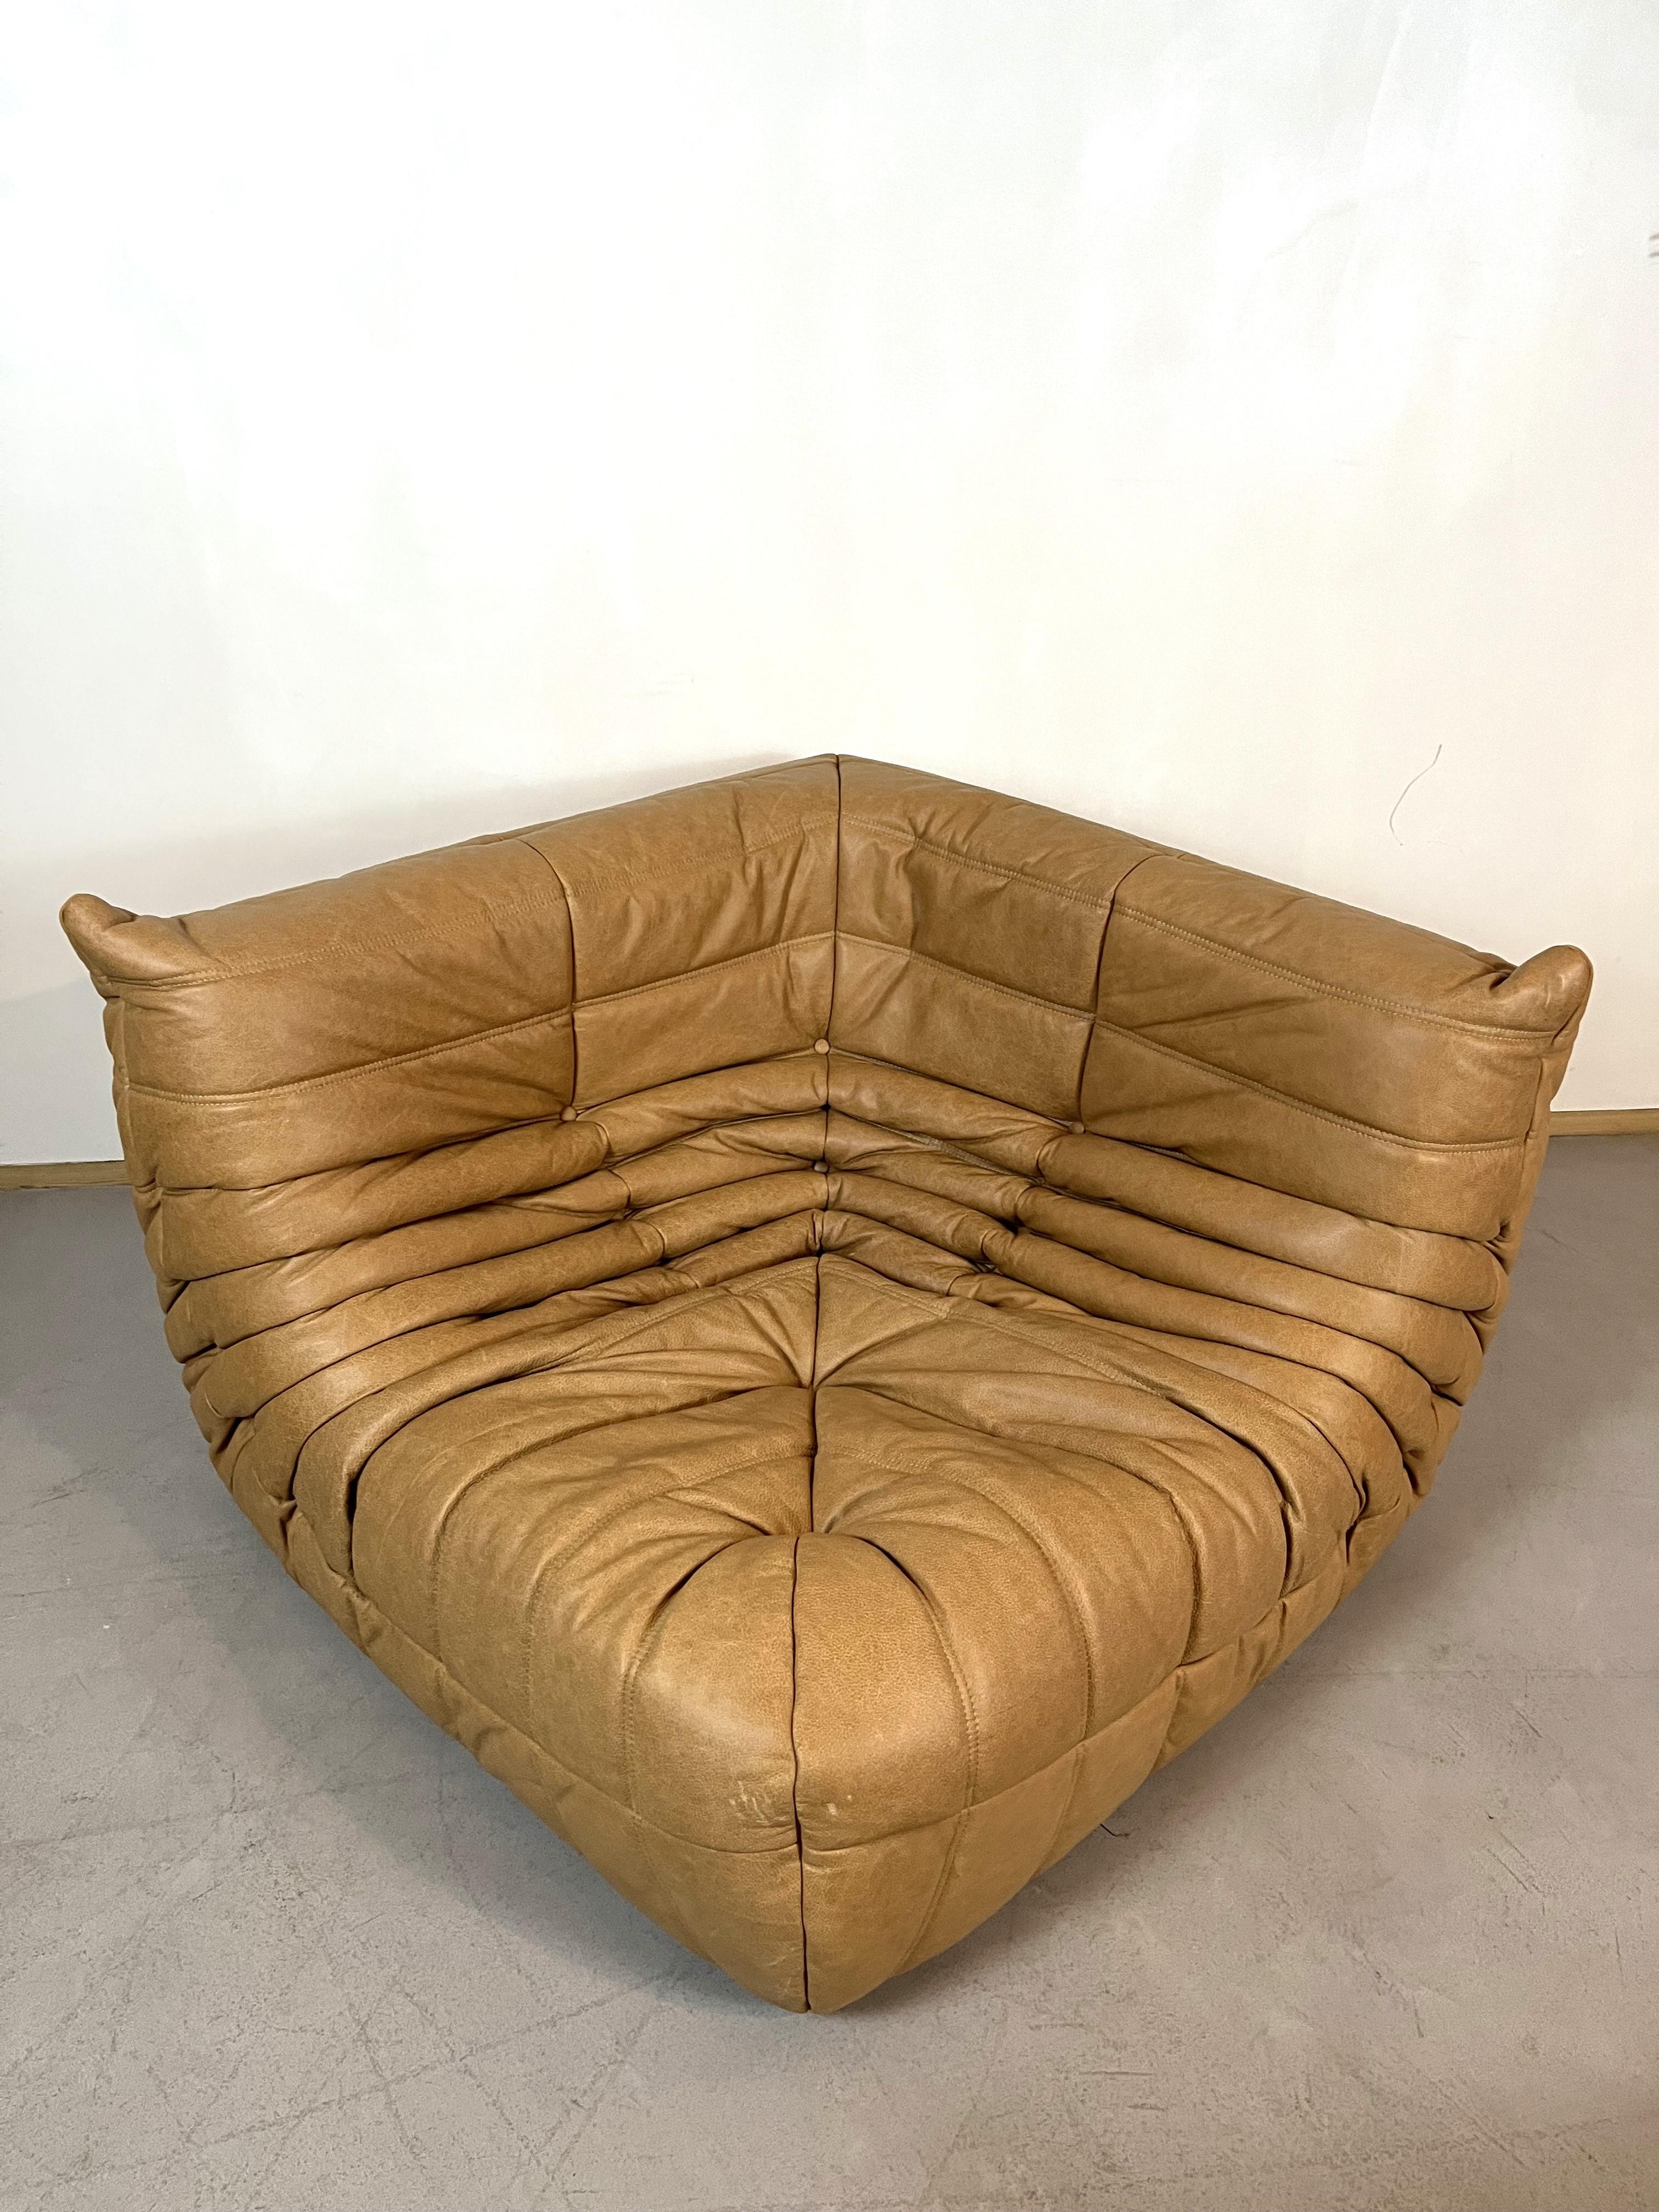 French Camel leather Togo Sofa by Michel Ducaroy for Ligne Roset, Set of 5 pieces